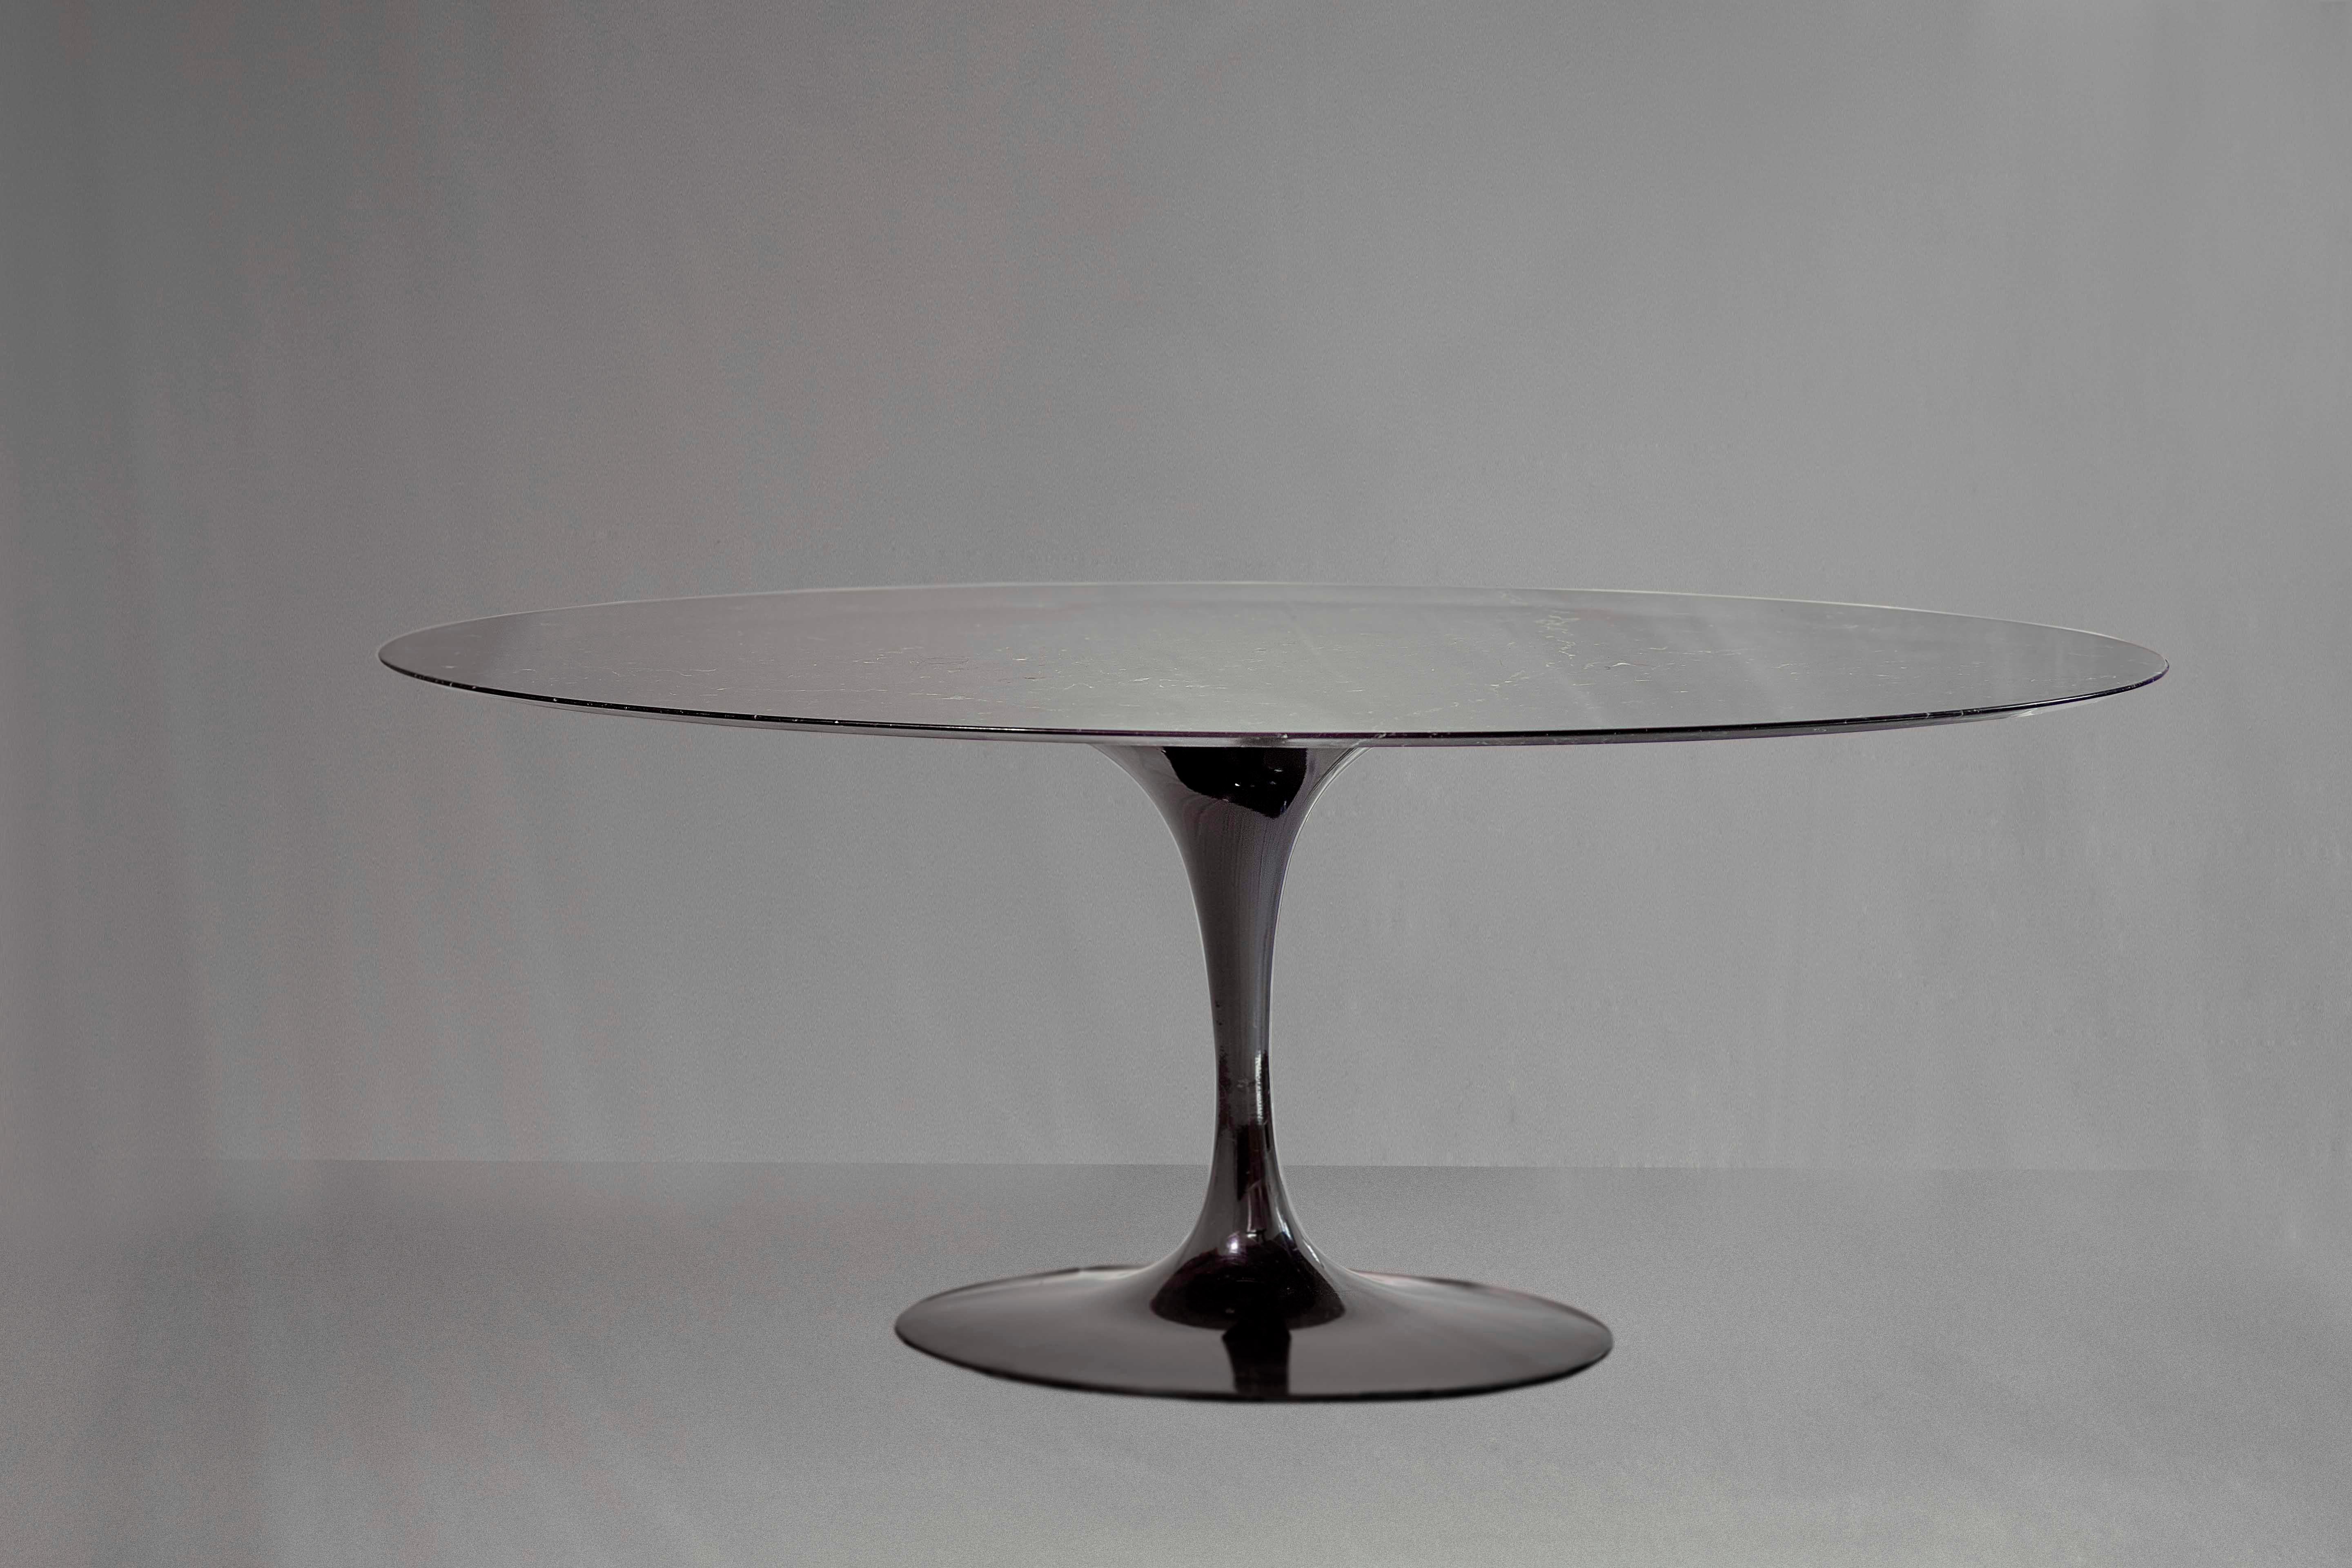 A Eero Saarinen stunning pedestal dining table, custom black Marquina Marble 
Saarinen (b.1910-d.1961) was a Finnish architect and designer most well known for designing the elegant 